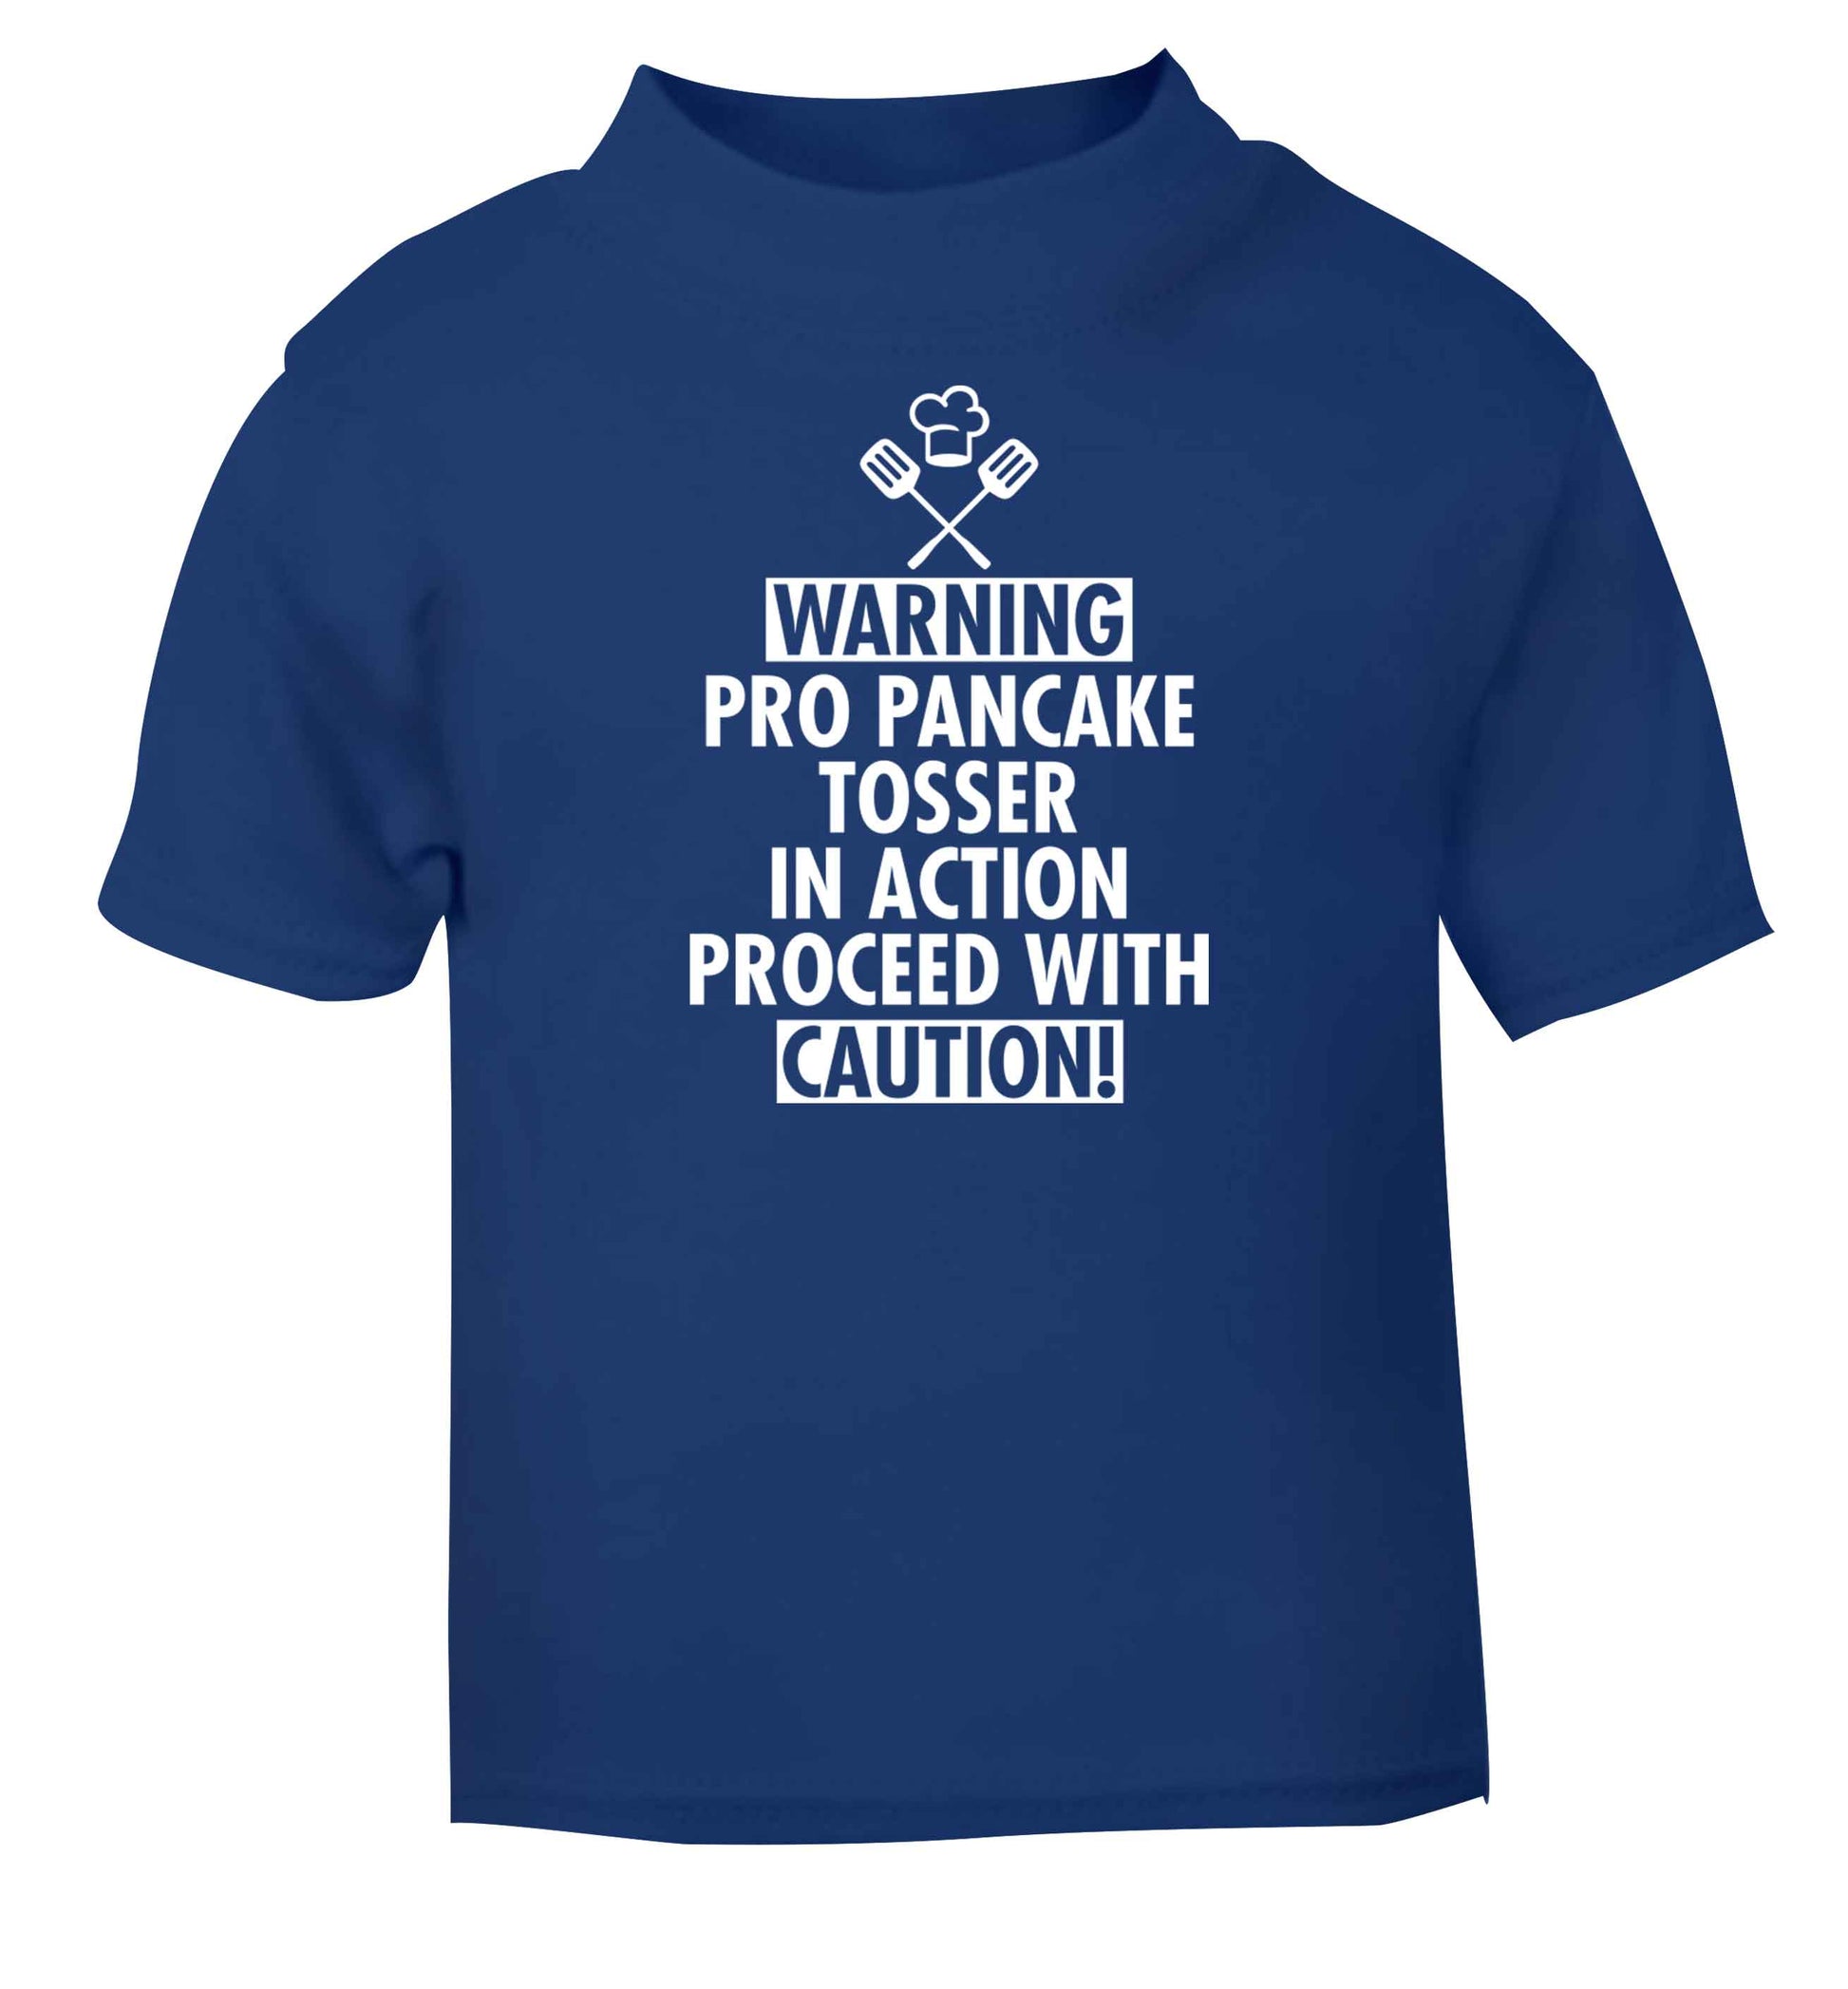 Warning pro pancake tosser in action proceed with caution blue baby toddler Tshirt 2 Years